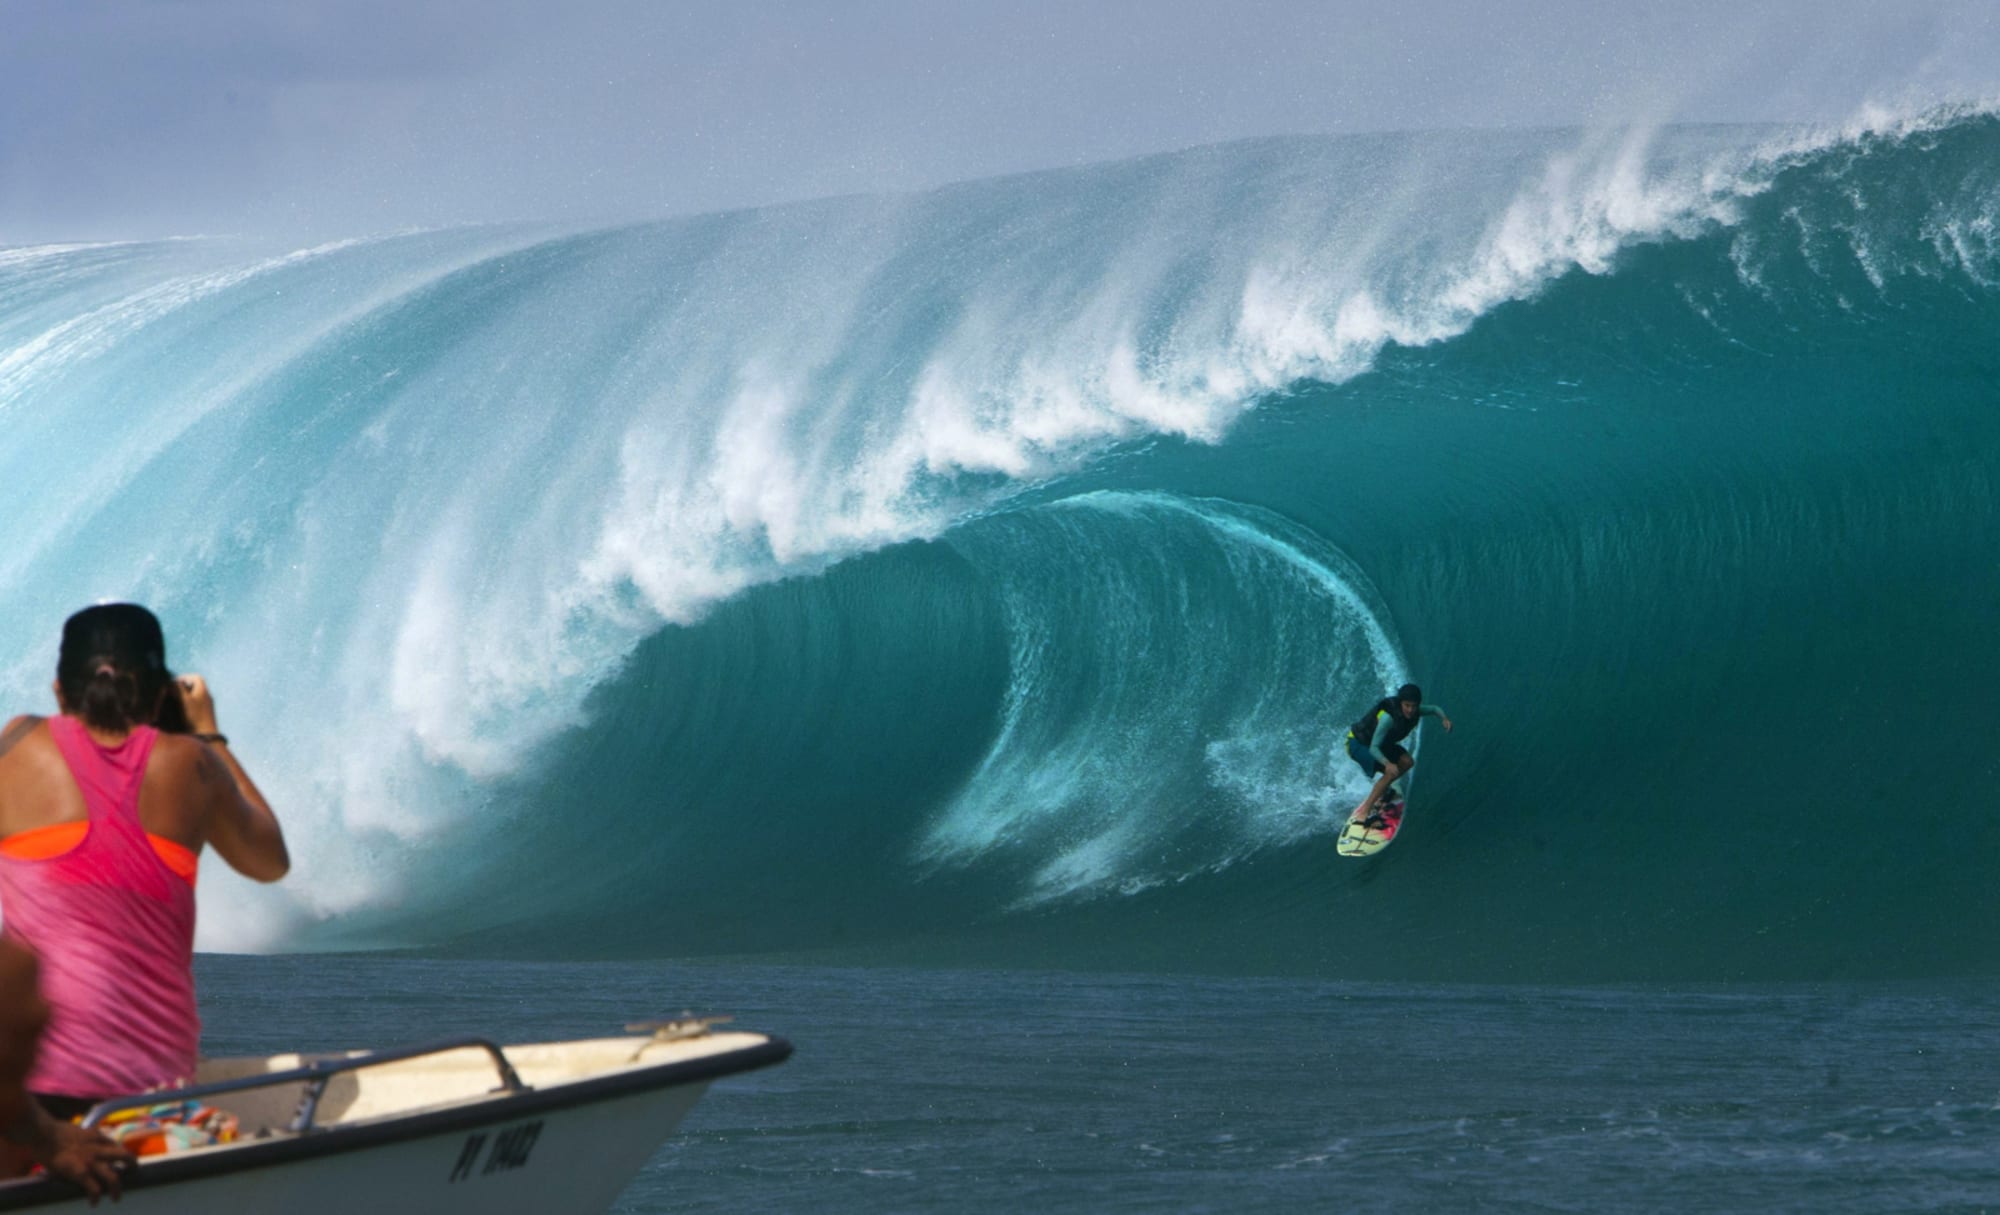 The Red Bull Magnitude big wave contest is for a second year